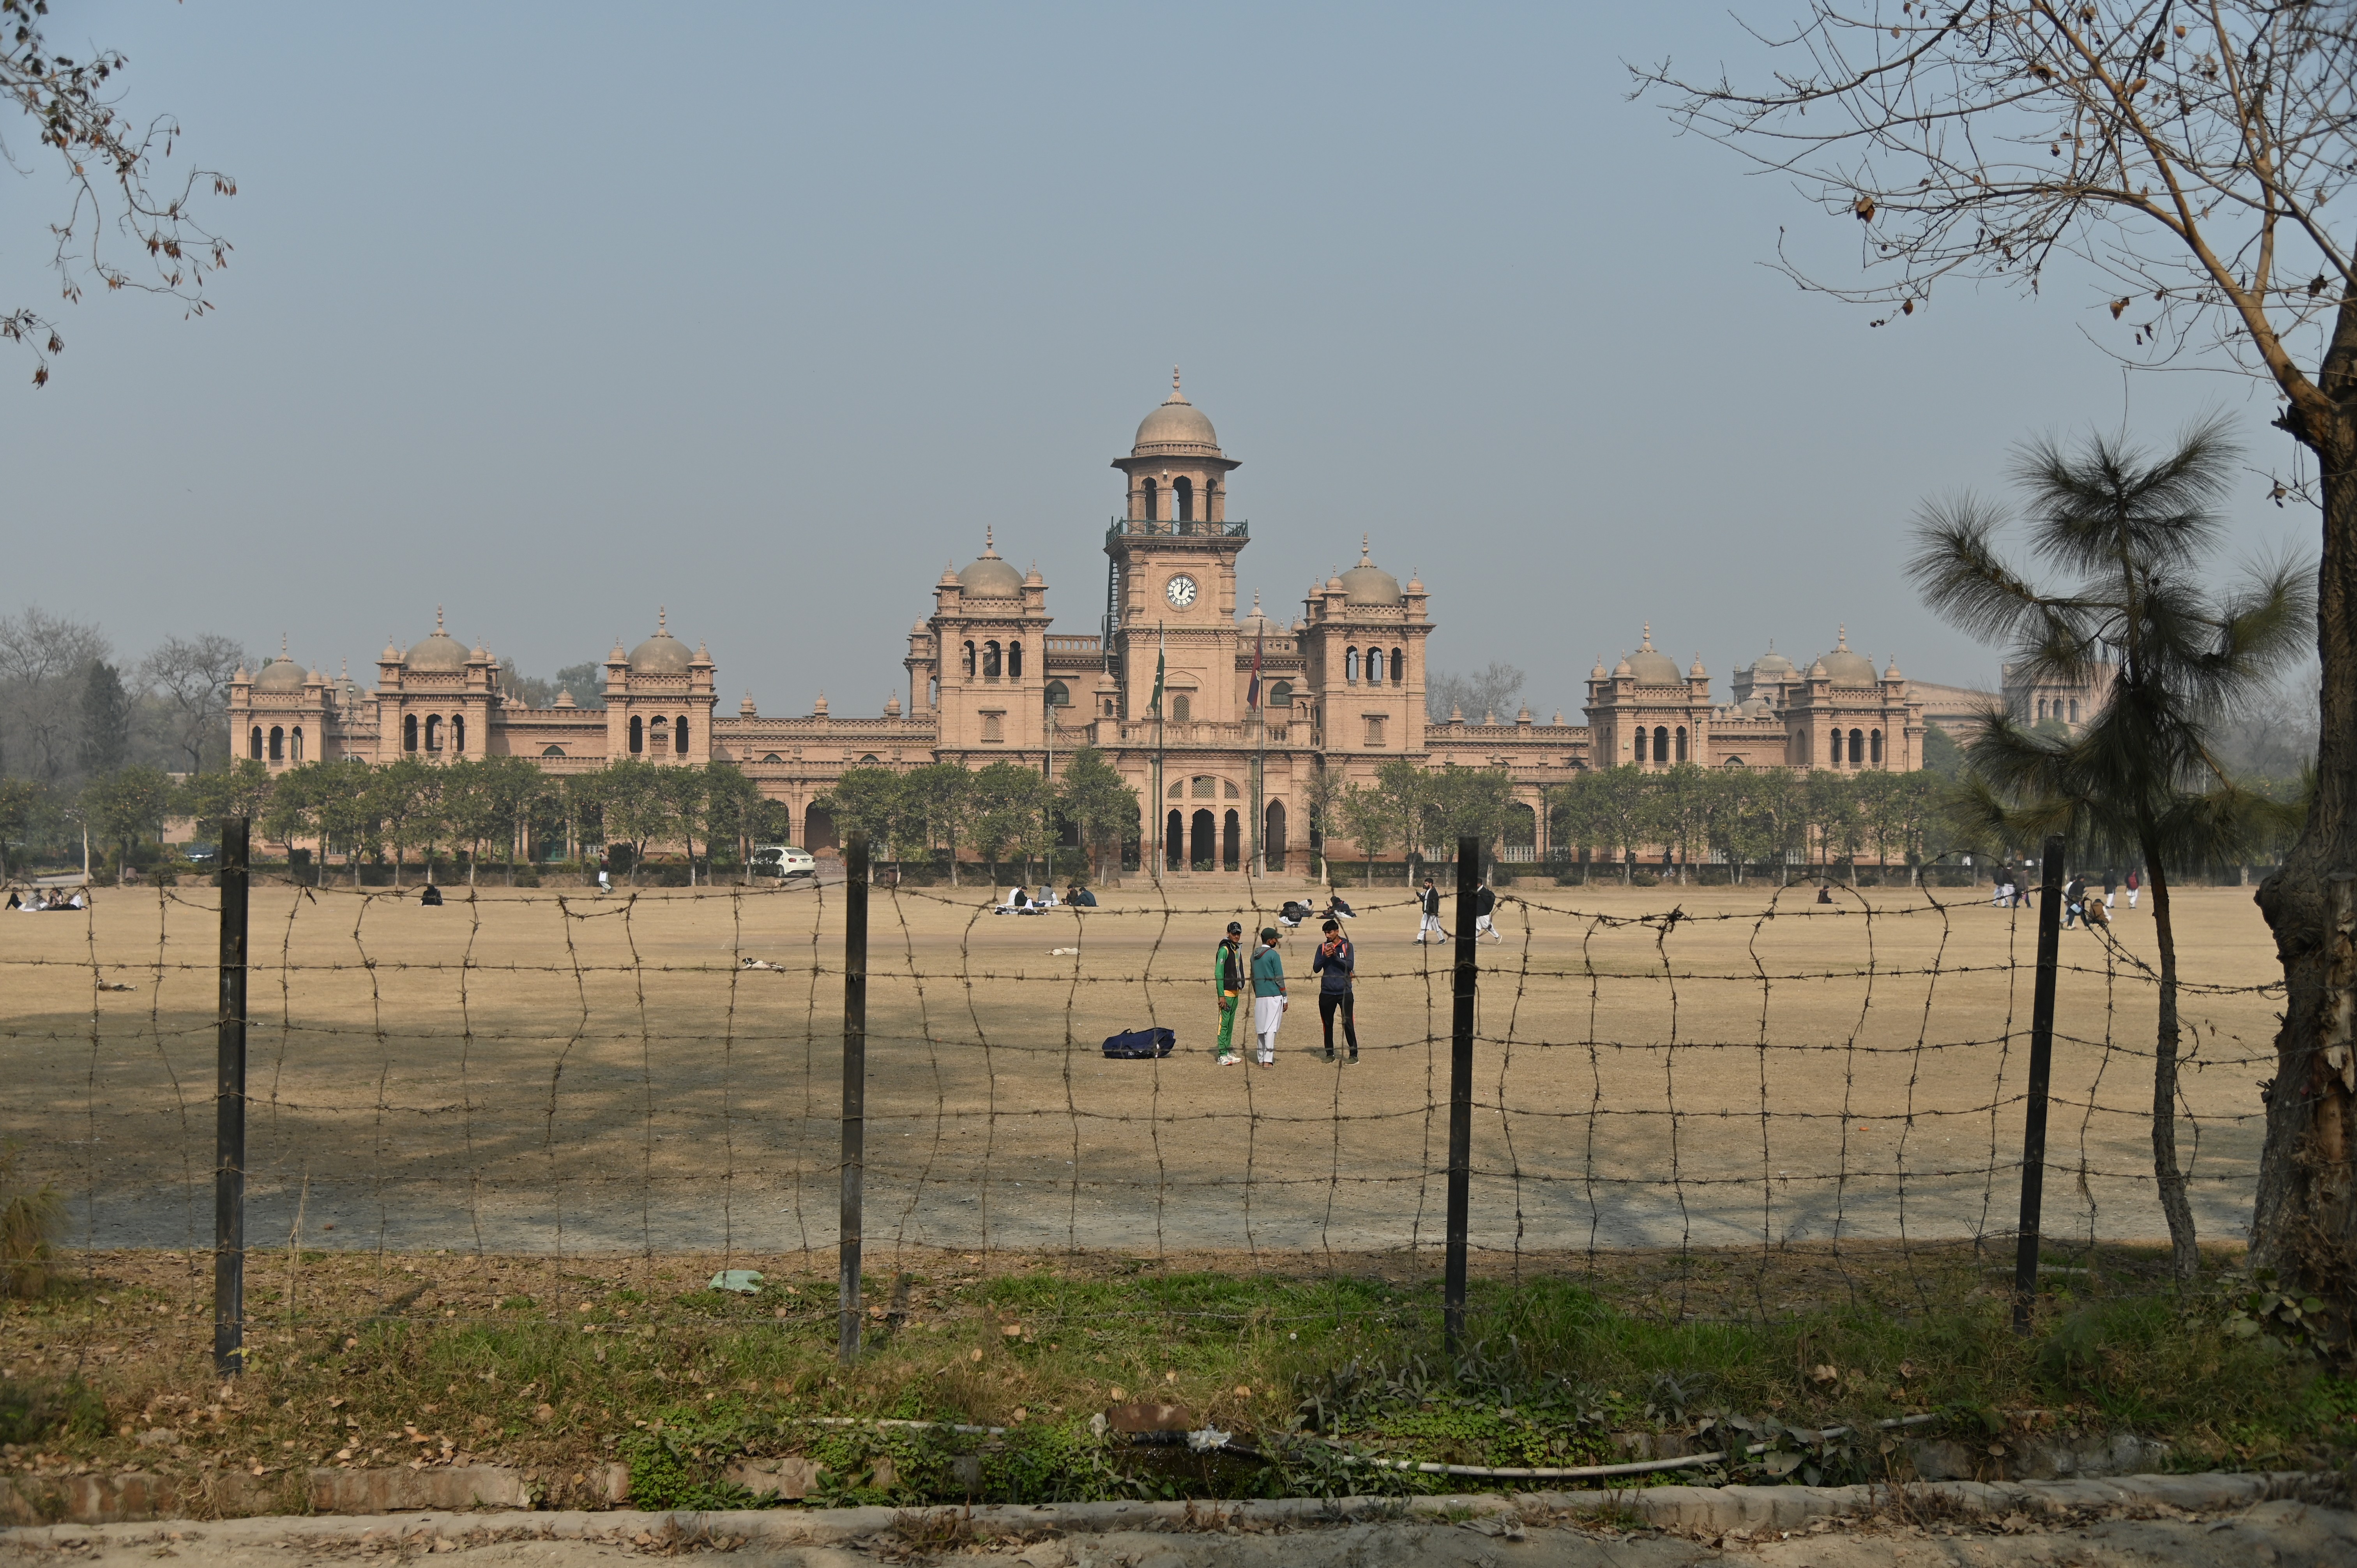 The beautiful Islamia College Peshawar, a Public University, Established in 1913 by Sir S.A. Qayyum and Sir George Roos-Keppel rooted in the historic legacy of the Aligarh Movement